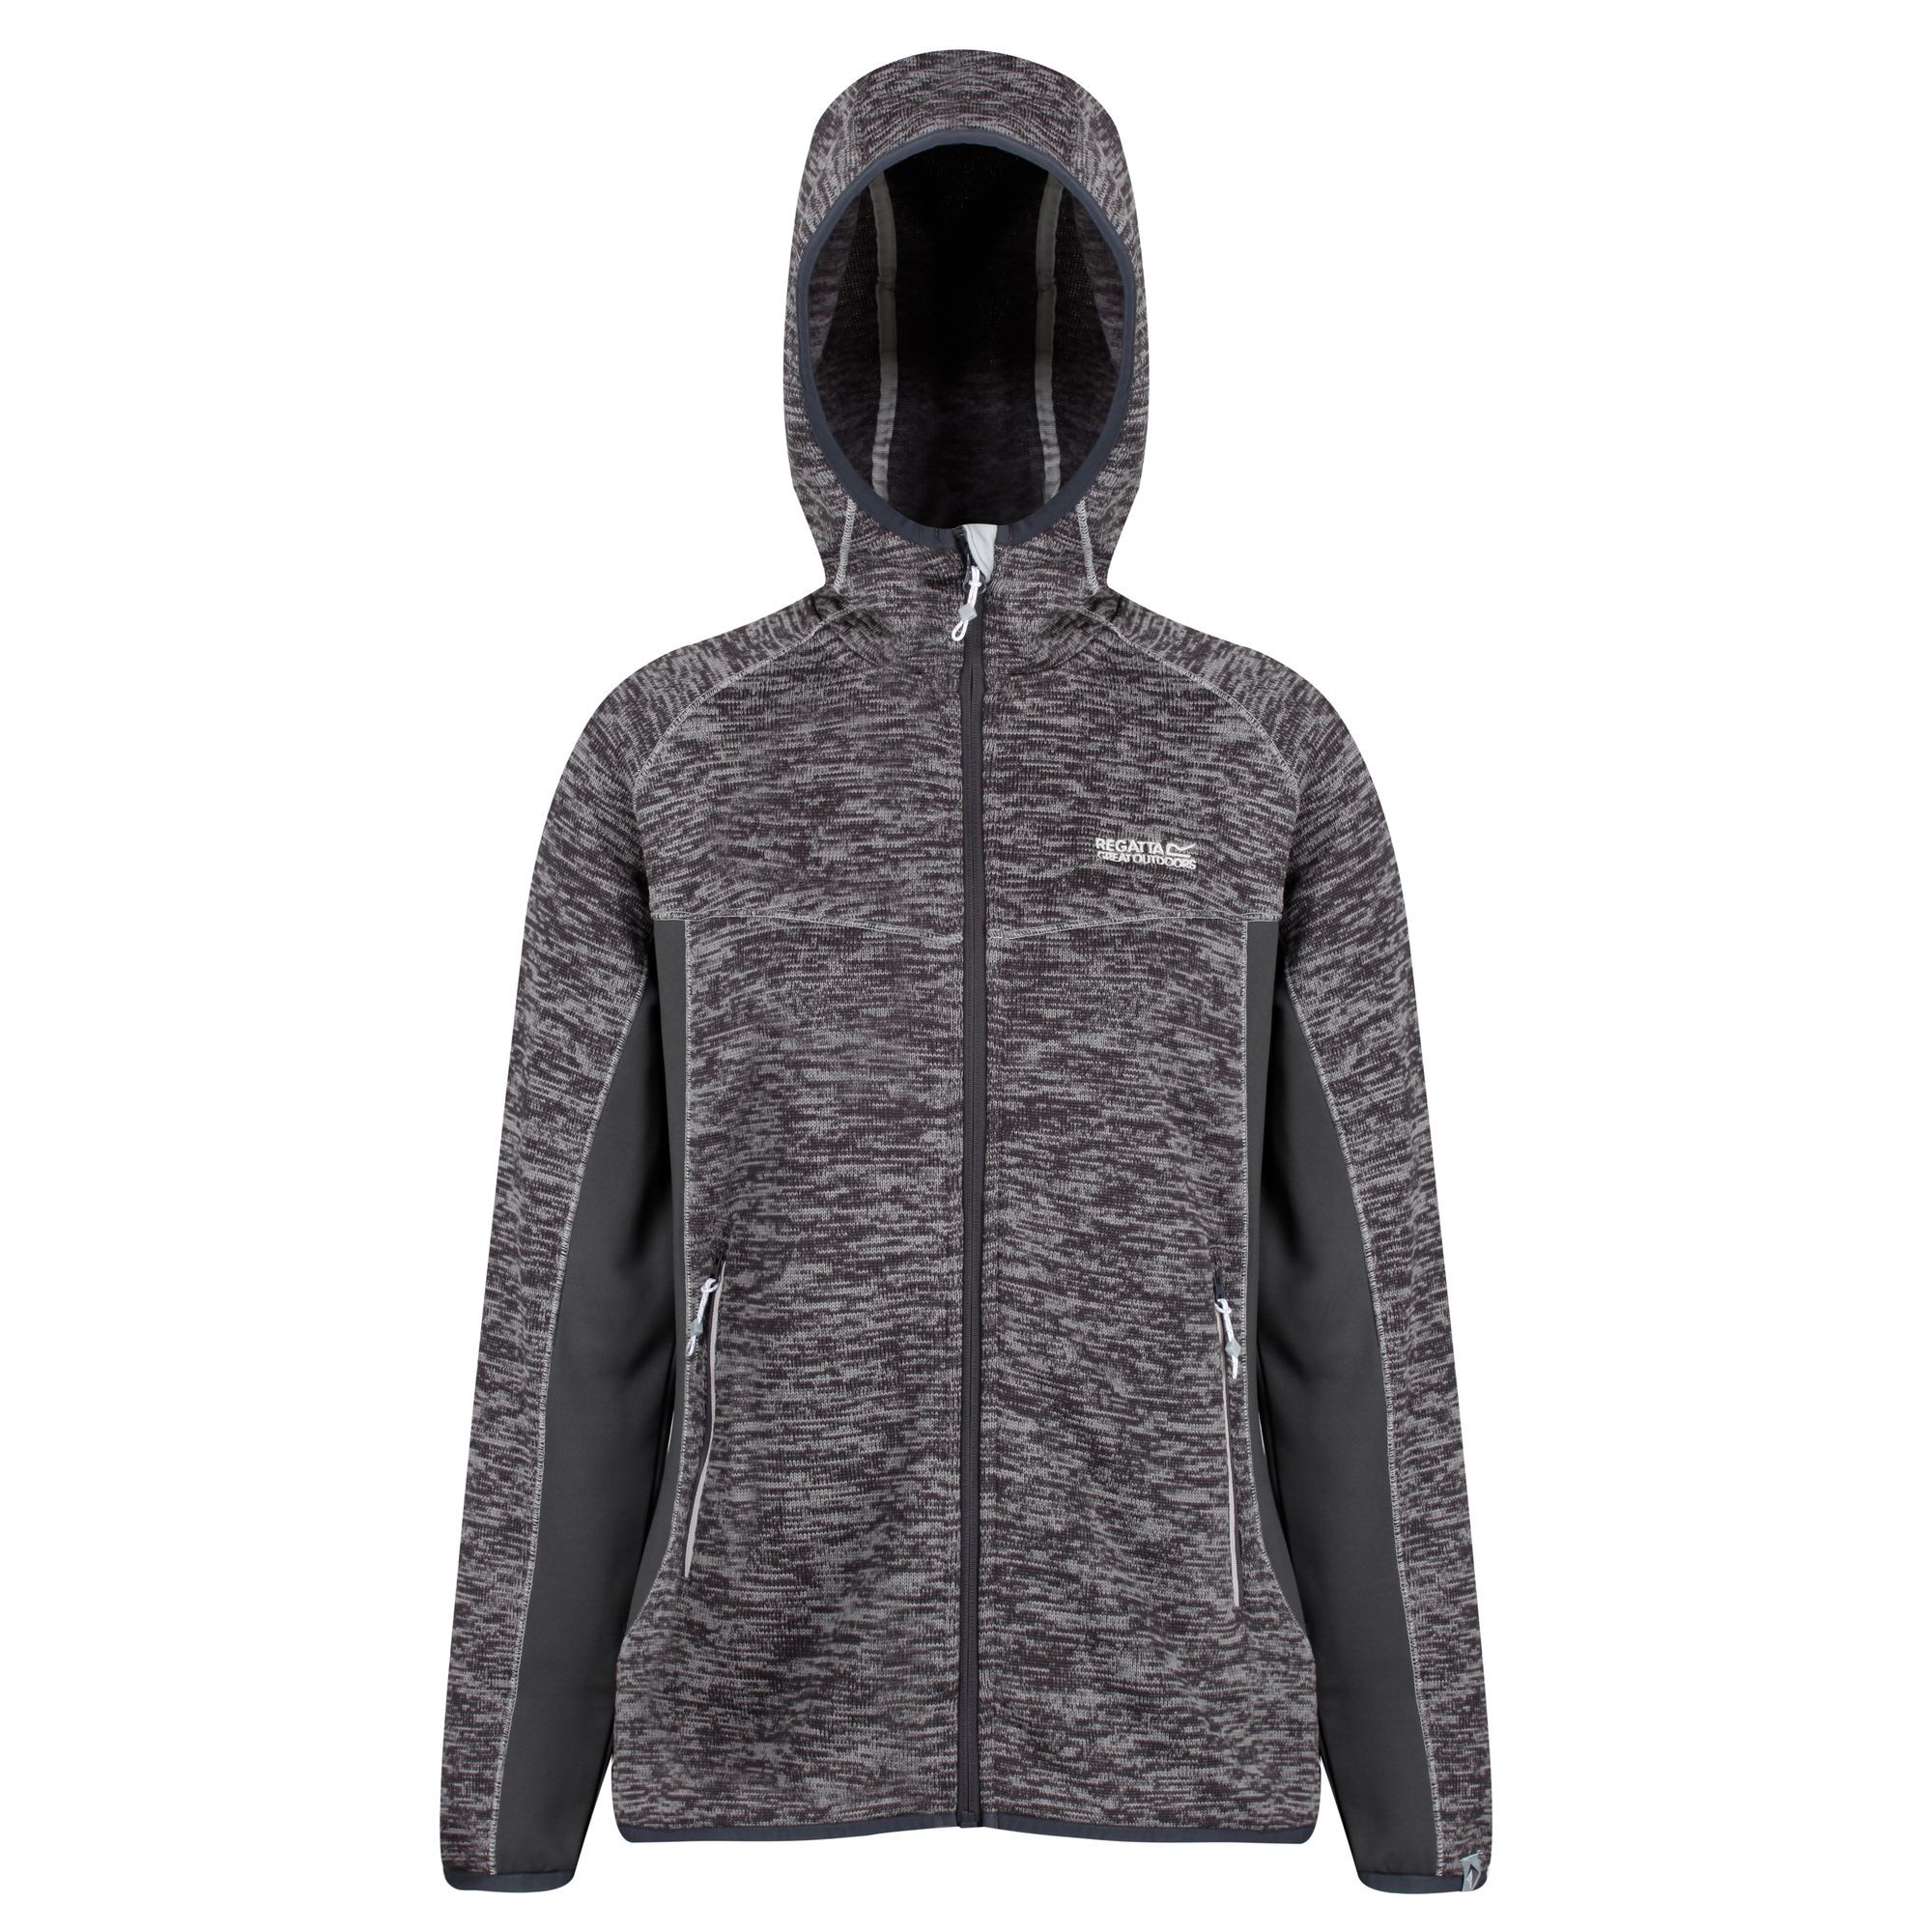 Womens hooded fleece made of 265gsm Polyester marl knit effect material. Extol stretch side, hood, and underarm panels. Grown on hood. 2 zipped lower pockets. Stretch binding to hood opening, cuffs, and hem. Ideal for wearing outdoors on a cold day. 100% Polyester.